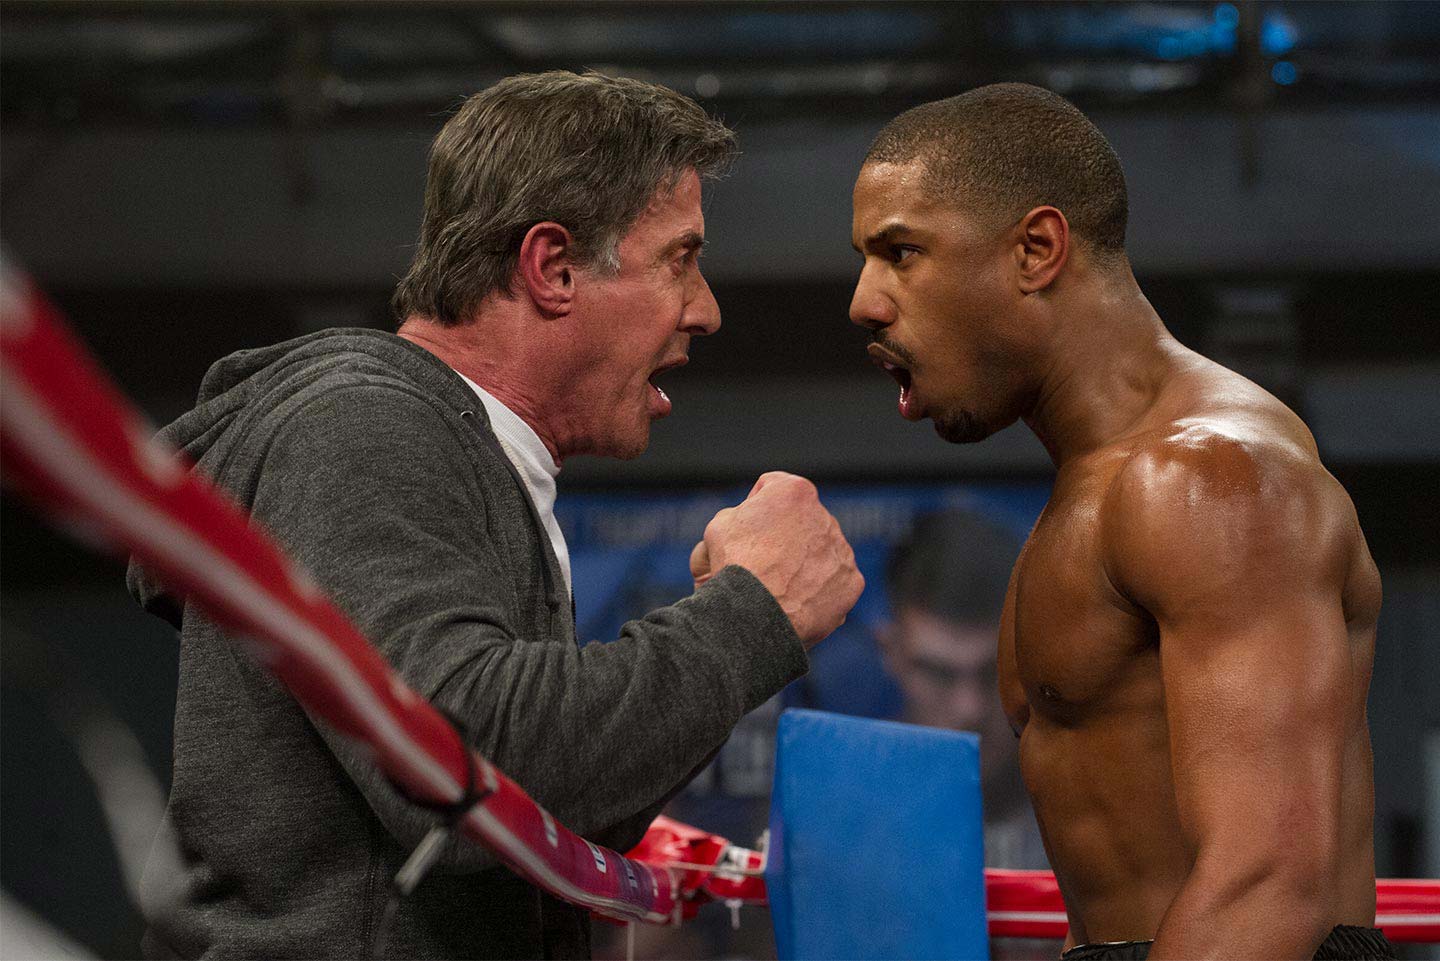 Movie Review: 'Creed' Rebrands Rocky Balboa For A New Generation